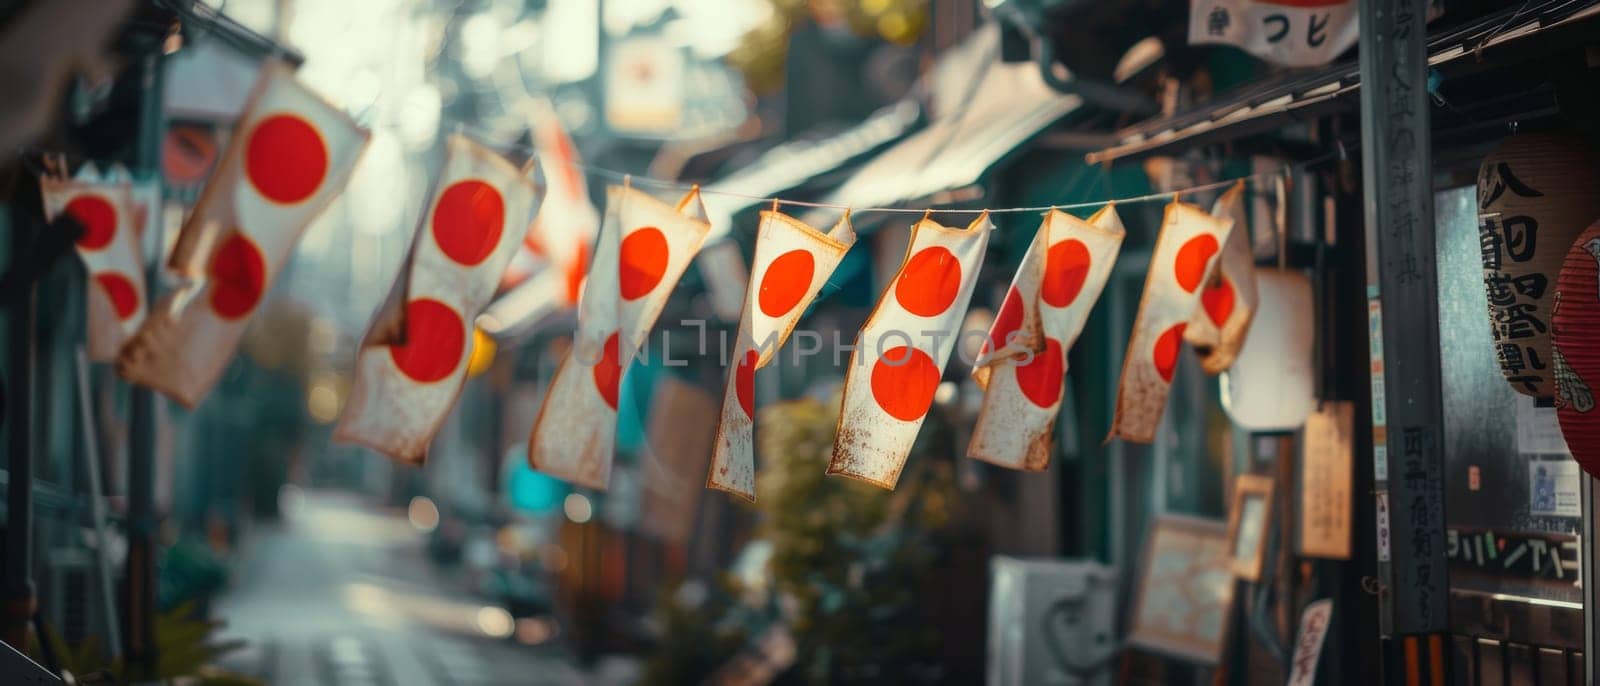 A serene Japanese street illuminated by the gentle glow of hanging flags, bearing the red and white motif, evoking a sense of tradition and community